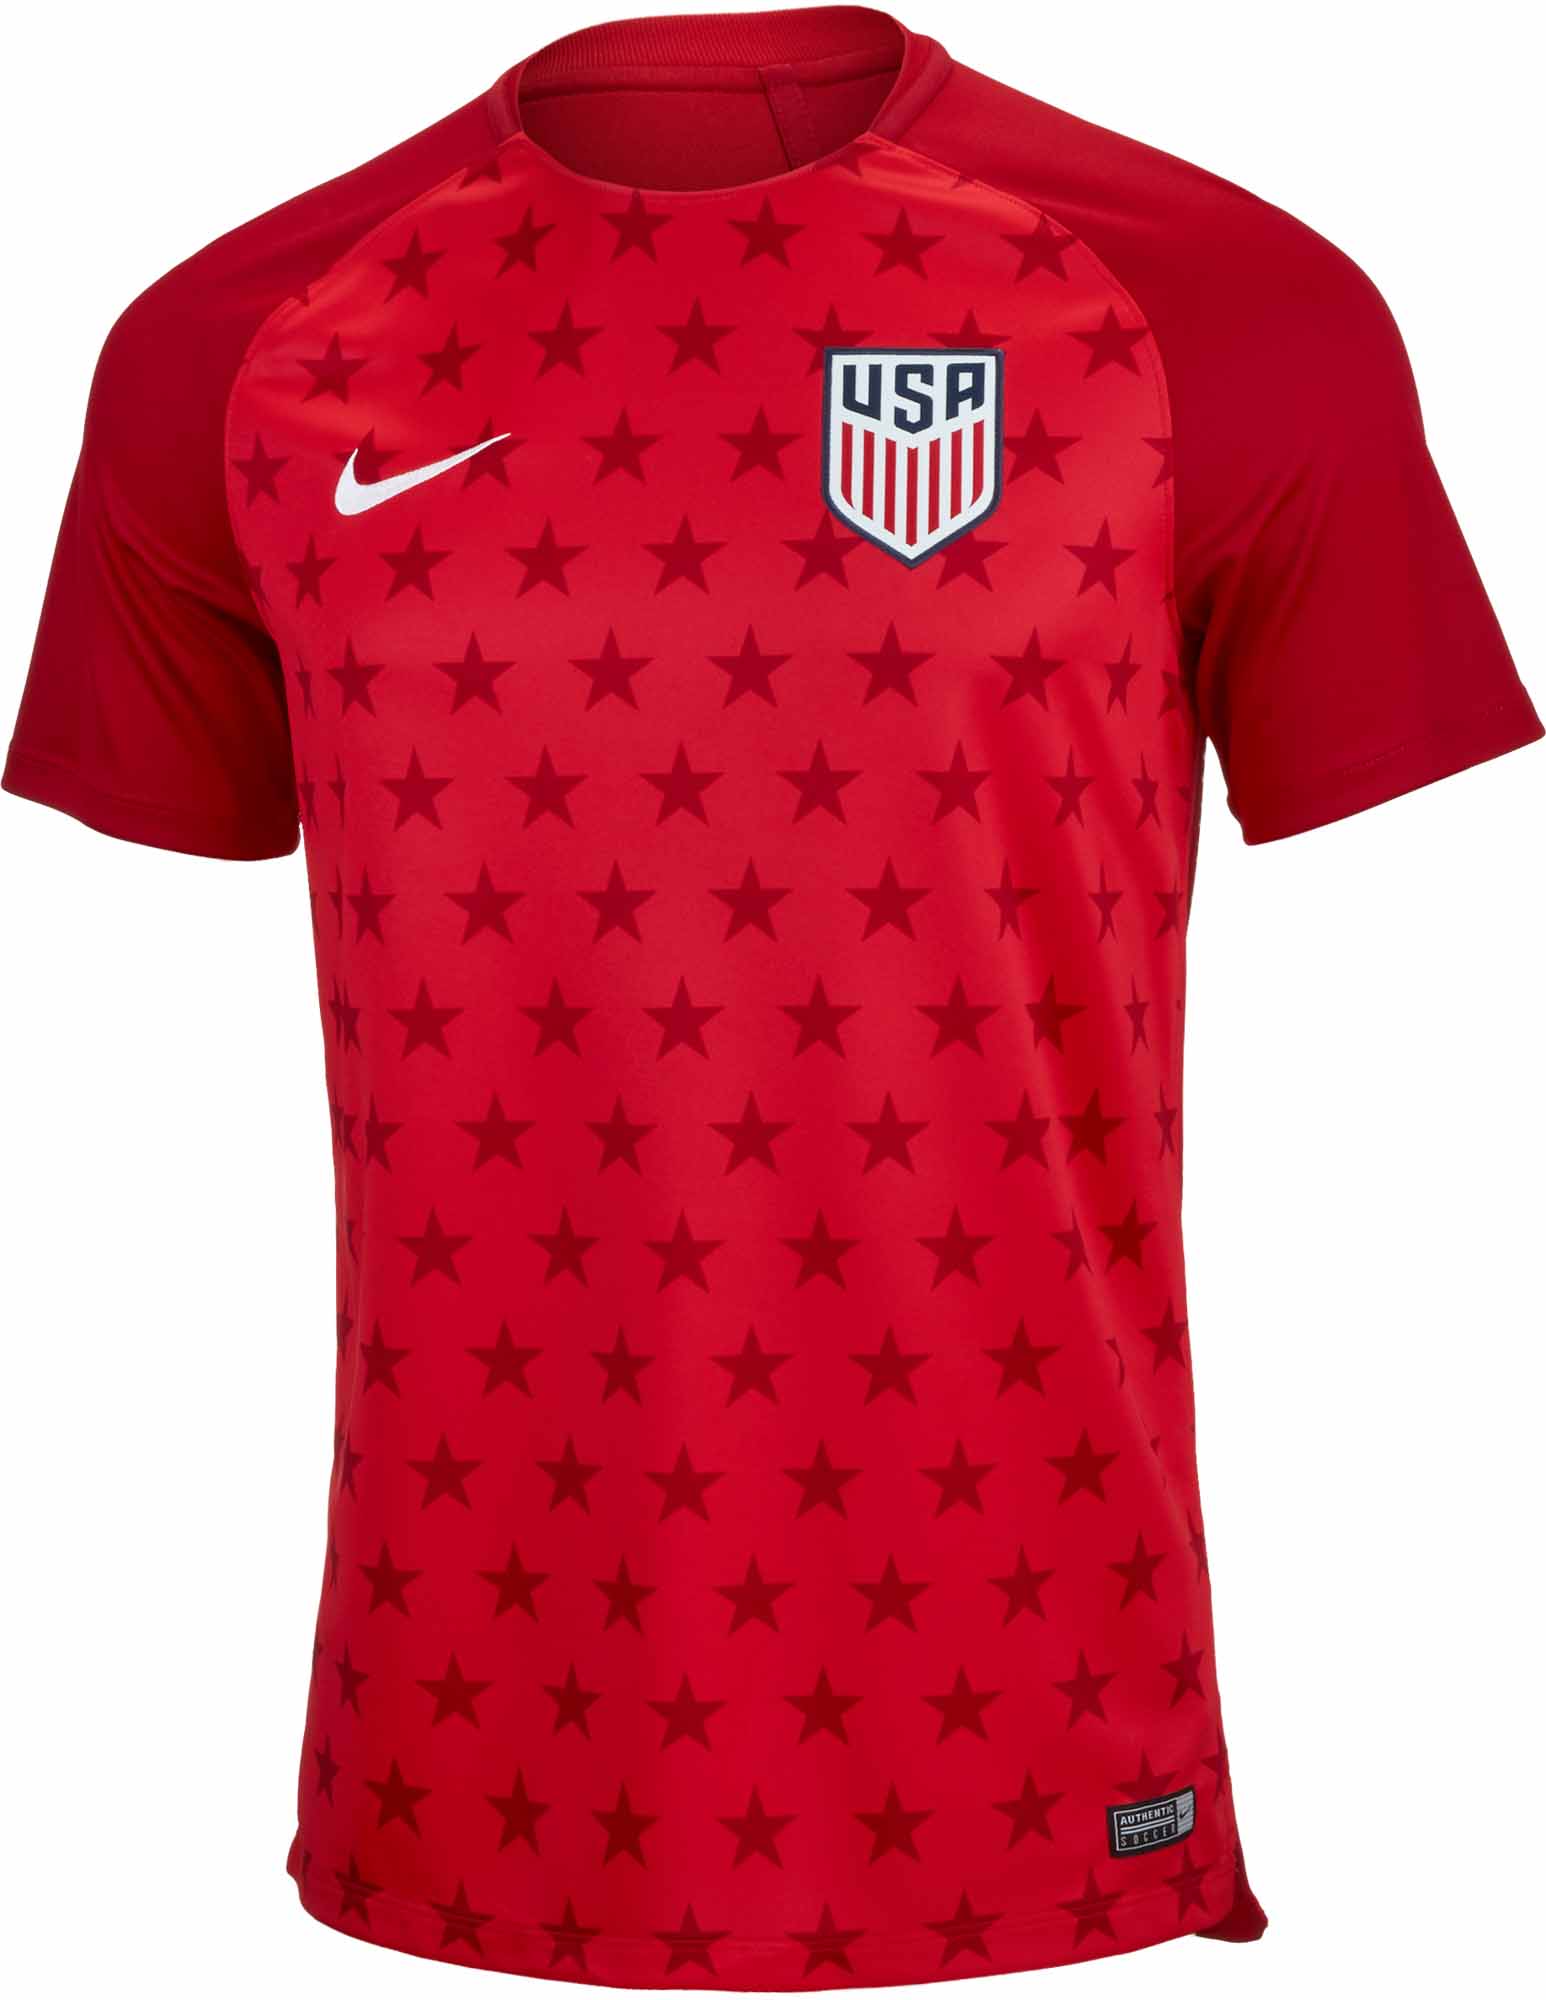 youth usa soccer jersey,Save up to